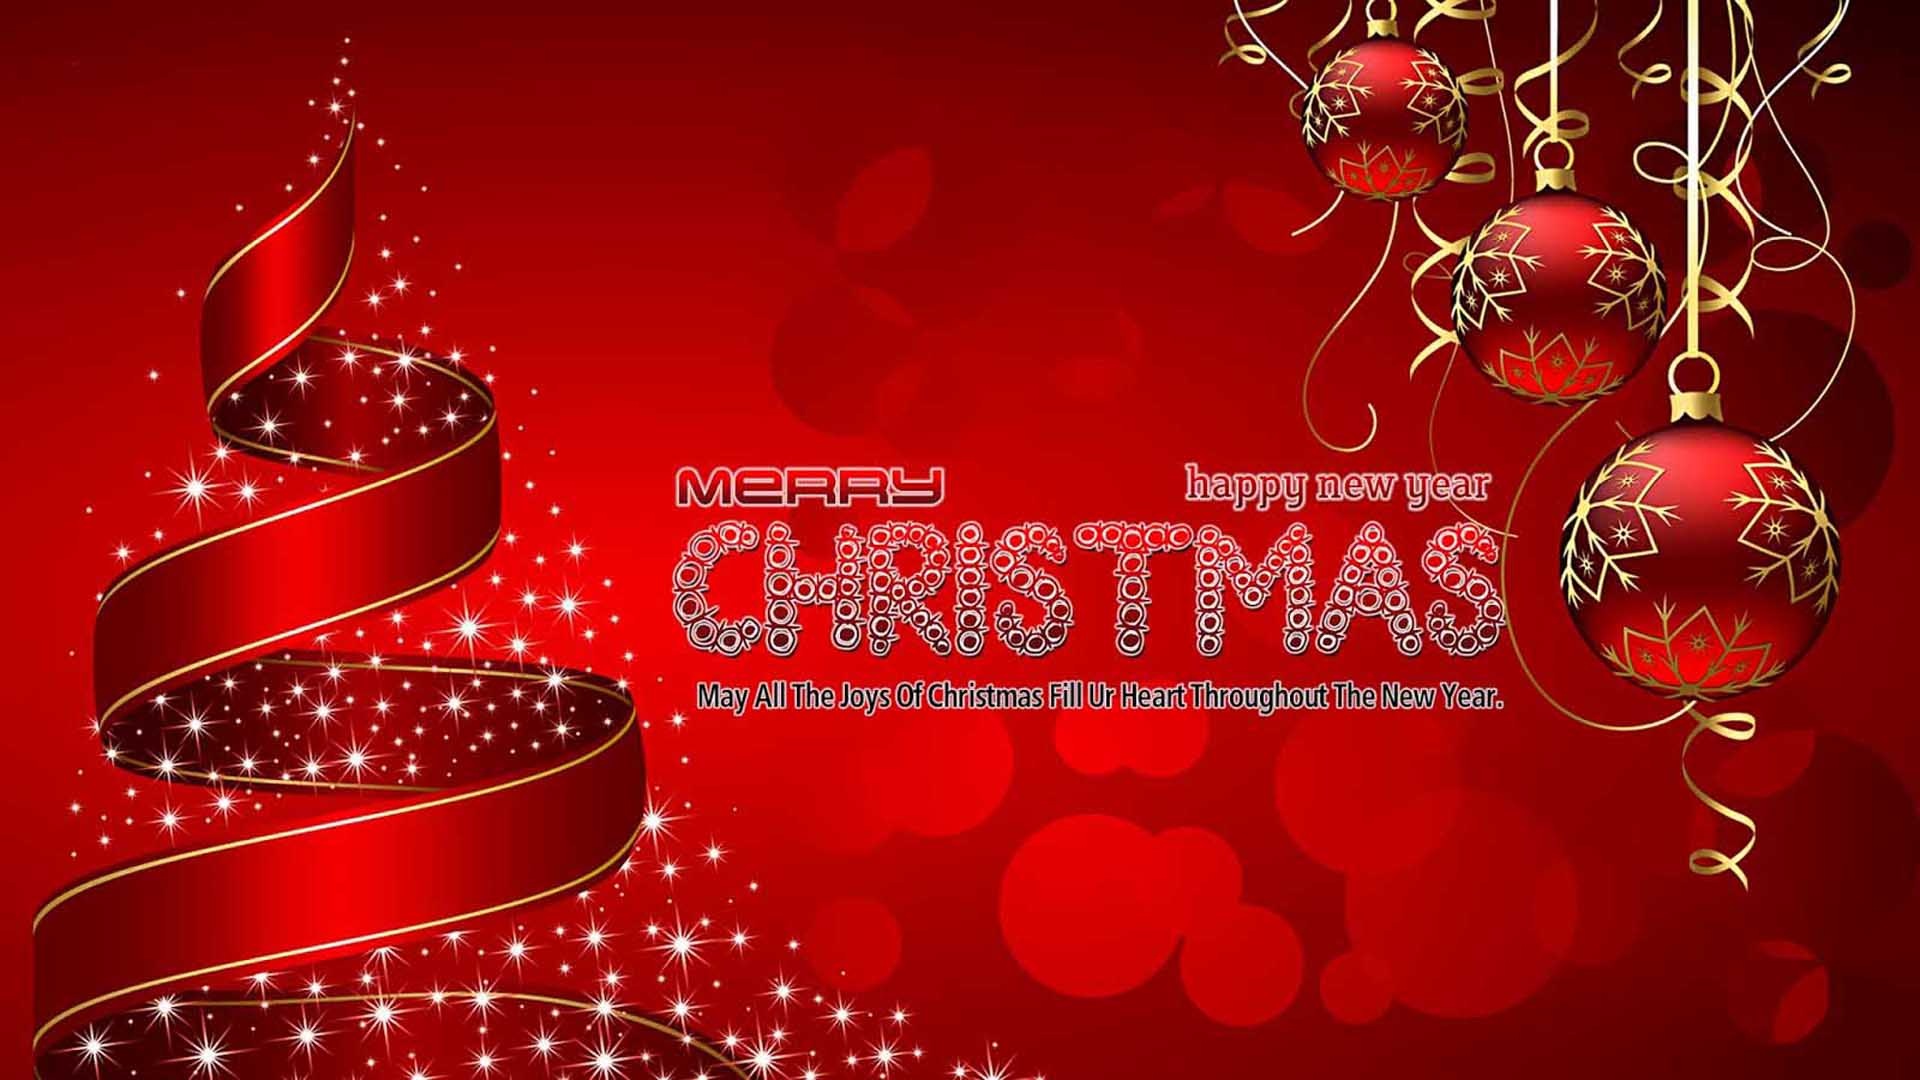 Free download Merry Christmas Happy New Year 2020 Christmas Greetings